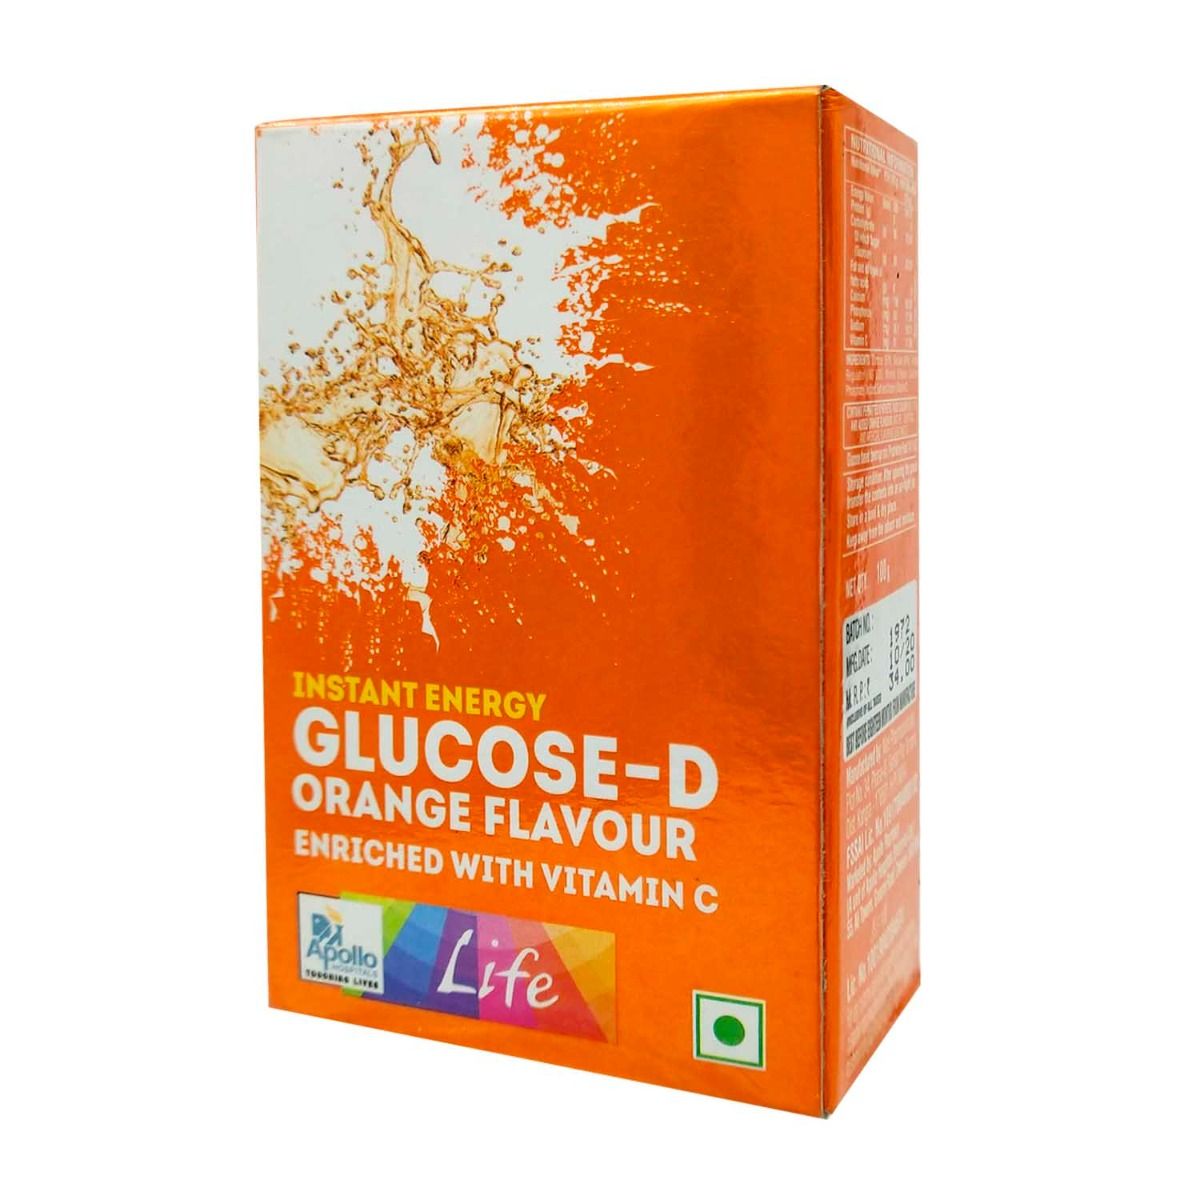 Apollo Life Glucose-D Instant Energy Orange Flavour Drink, 100 gm, Pack of 1 